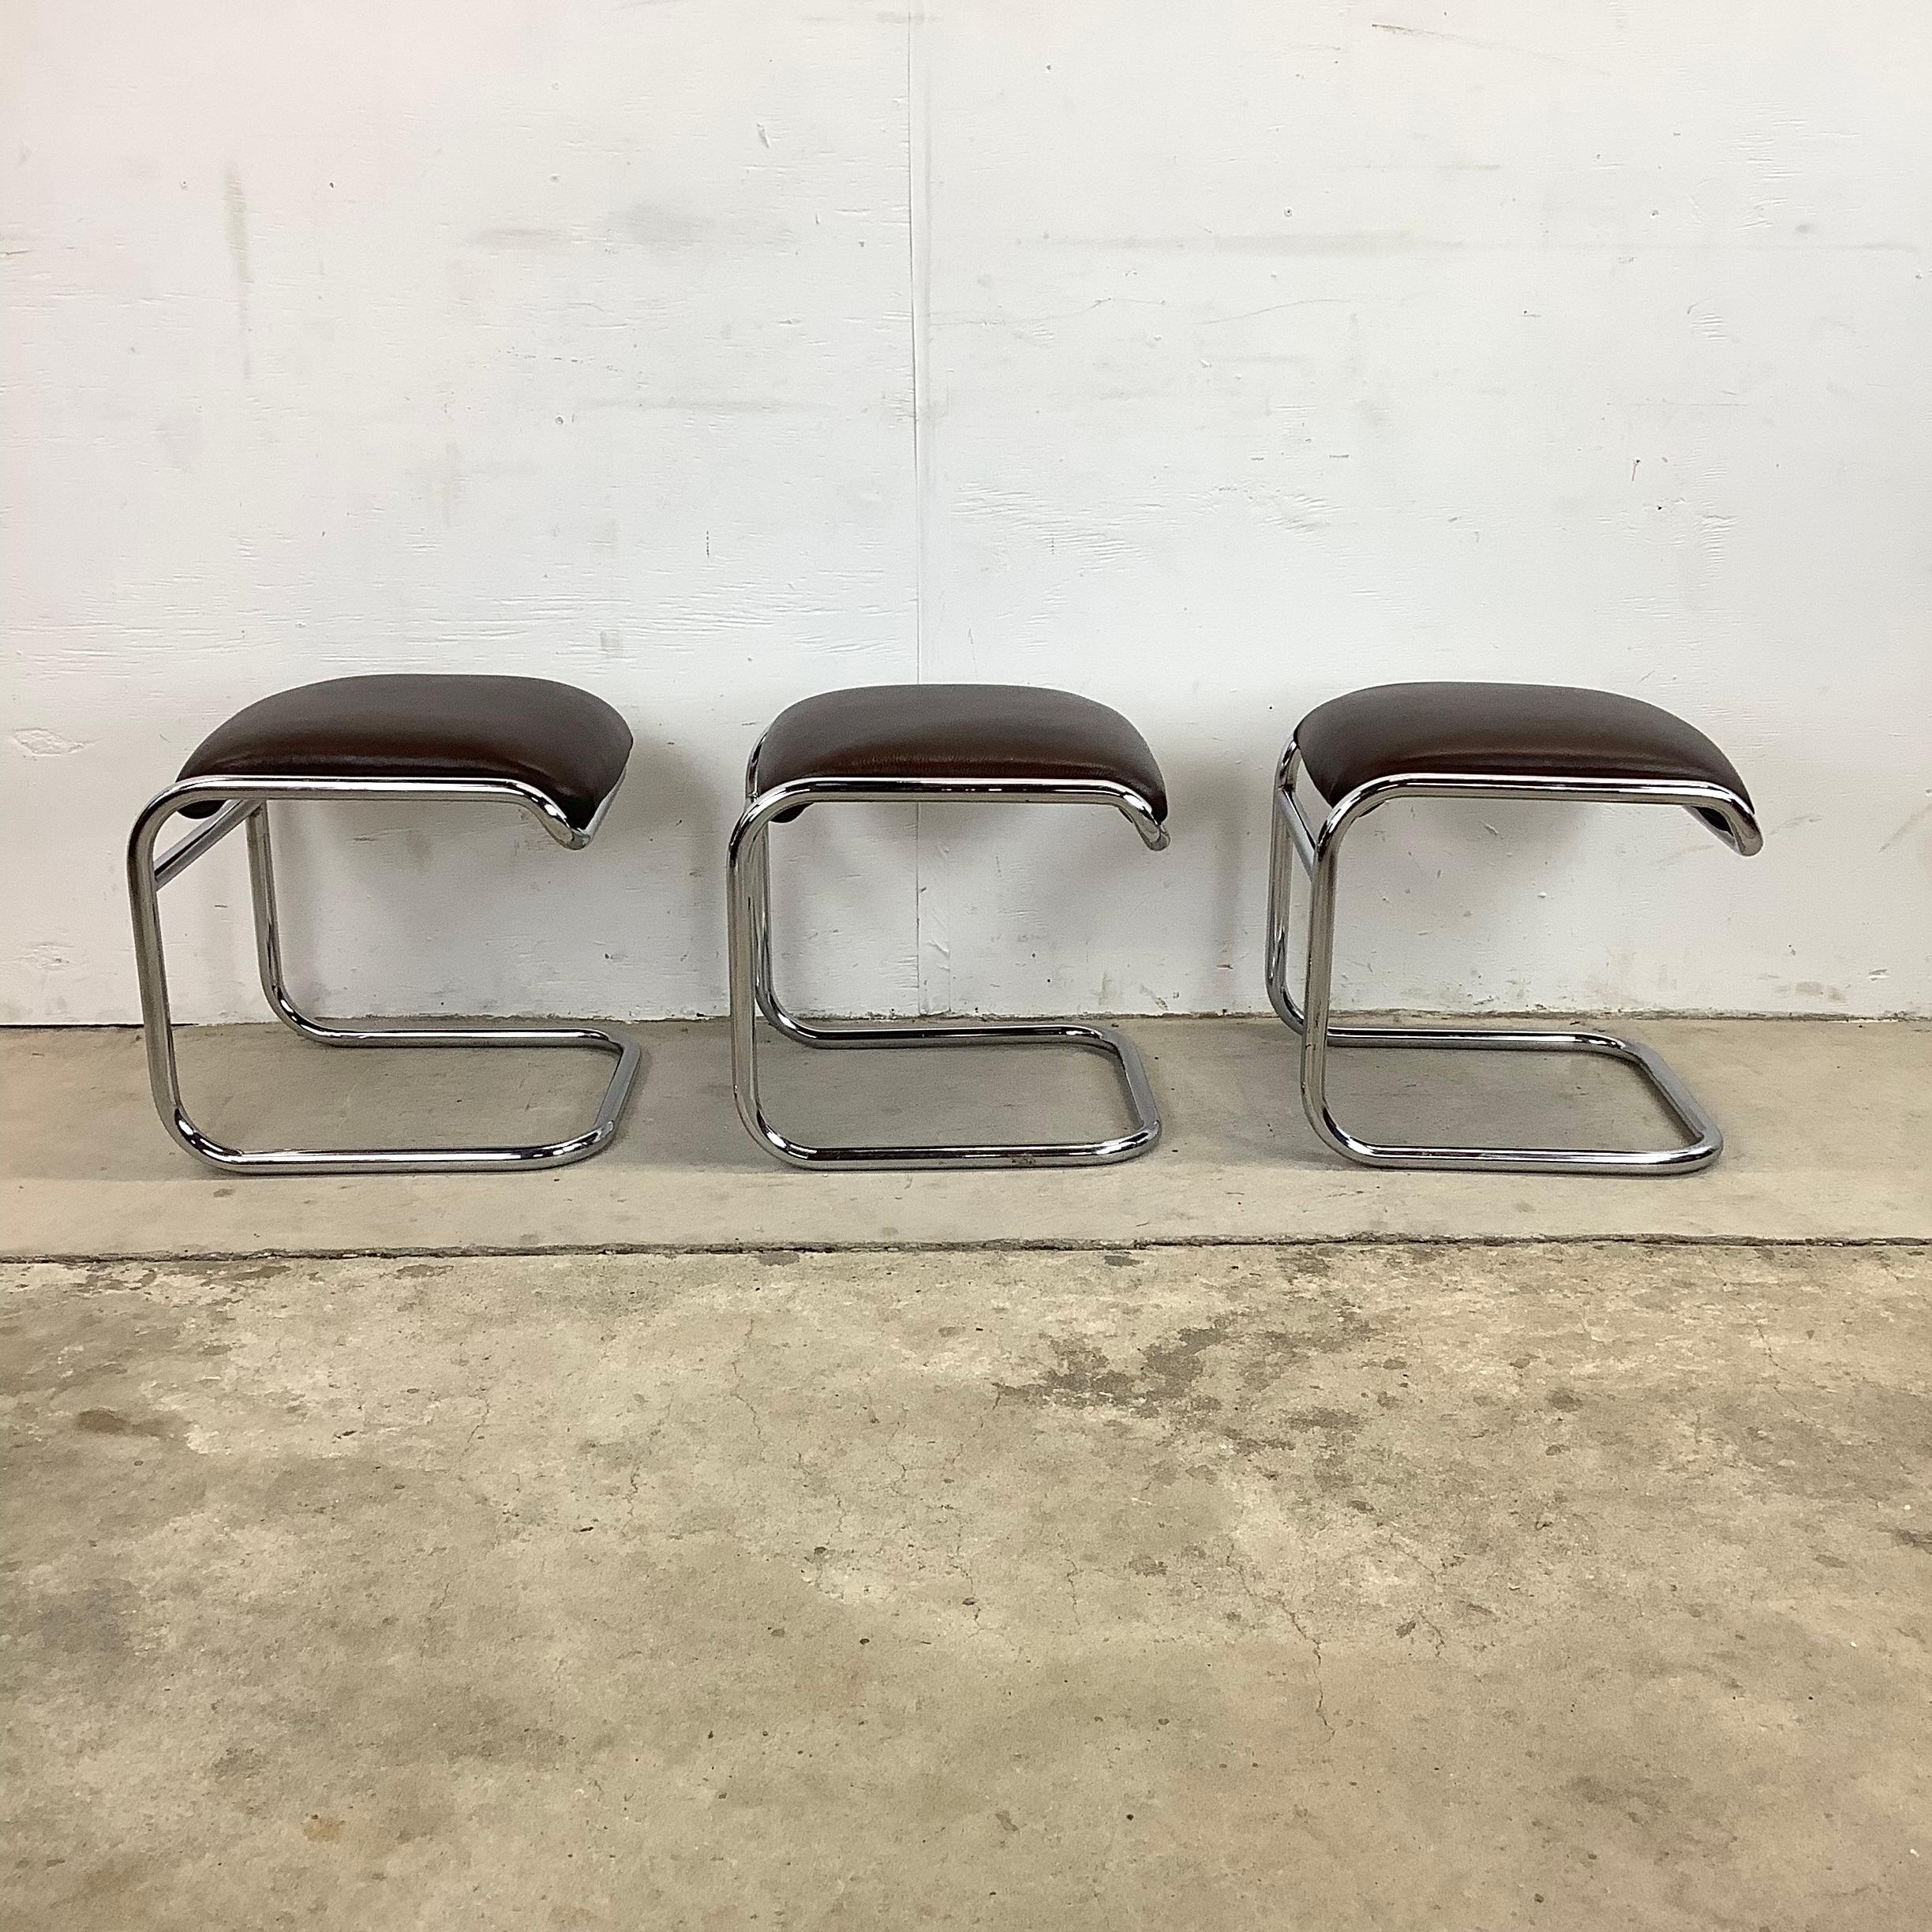 The elegant bauhaus style of this matching set of three vintage modern low stools features the iconic cantilever design of Anton Lorenz from Thonet makes a simple yet stunning addition to any interior in need of additional seating. Impressive